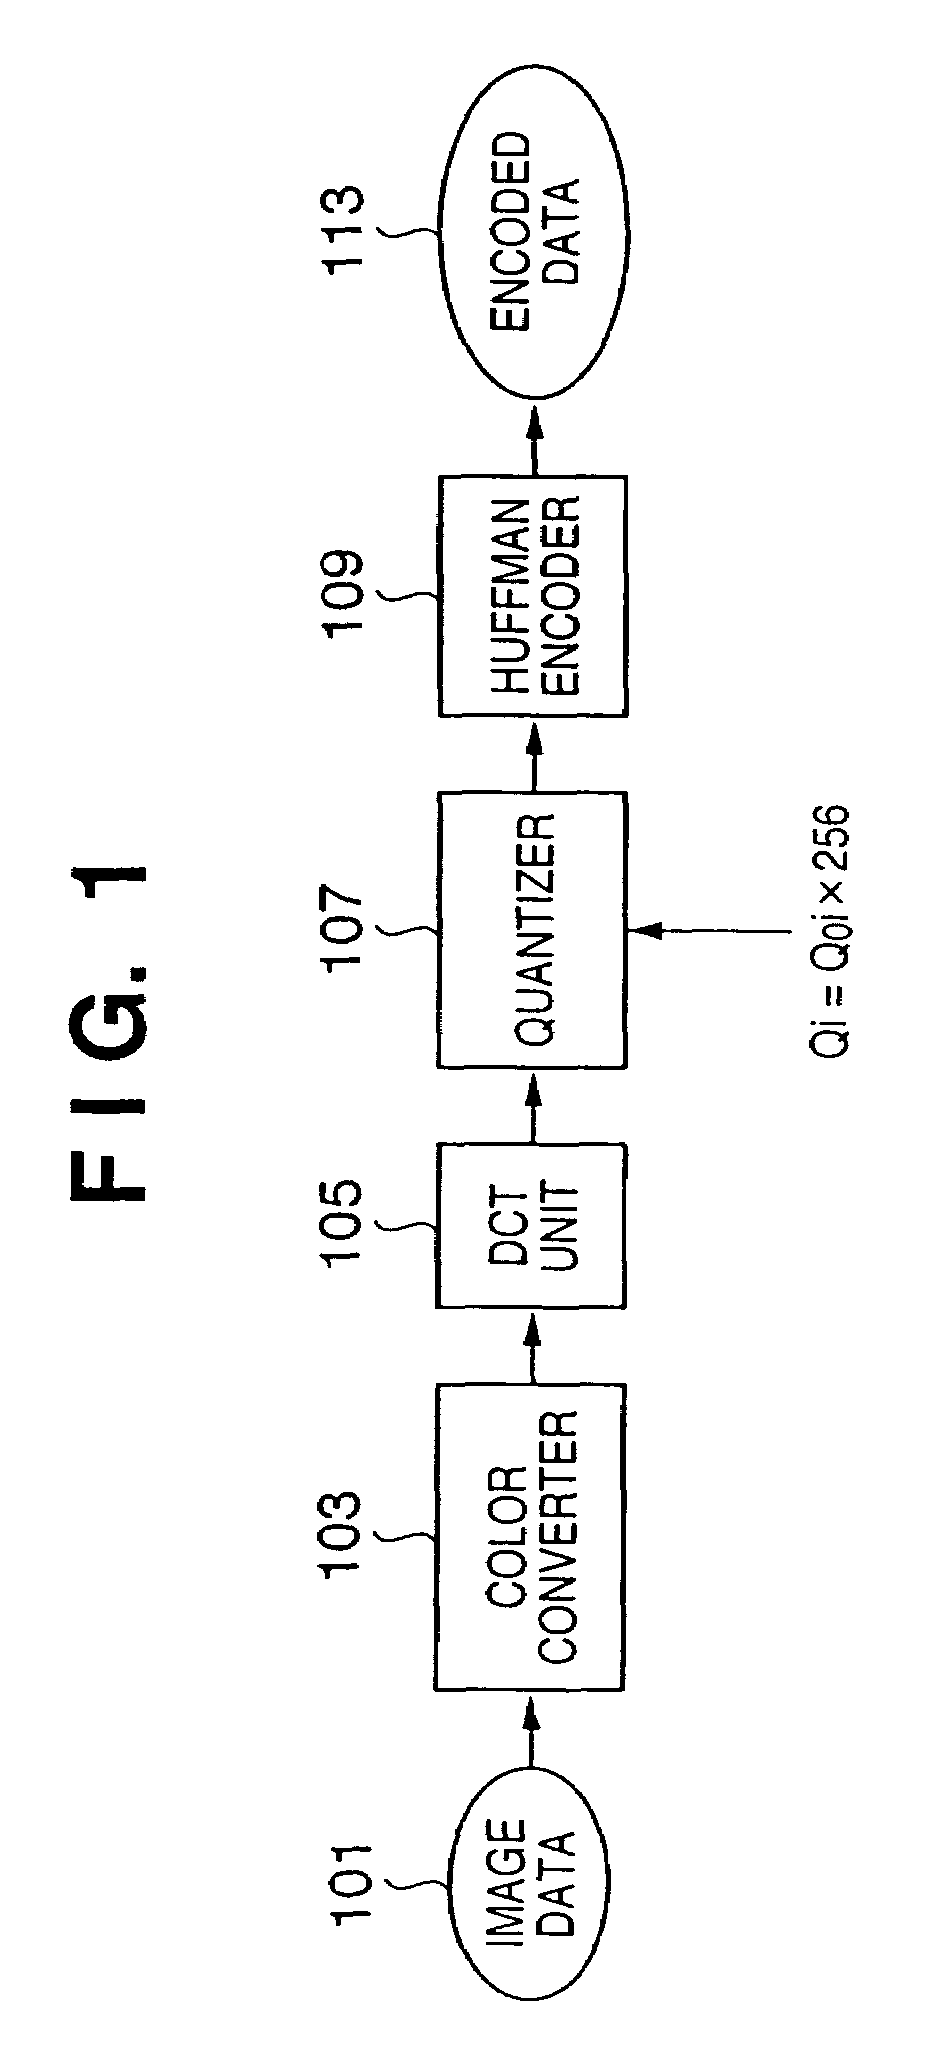 Image decoding apparatus and its control method